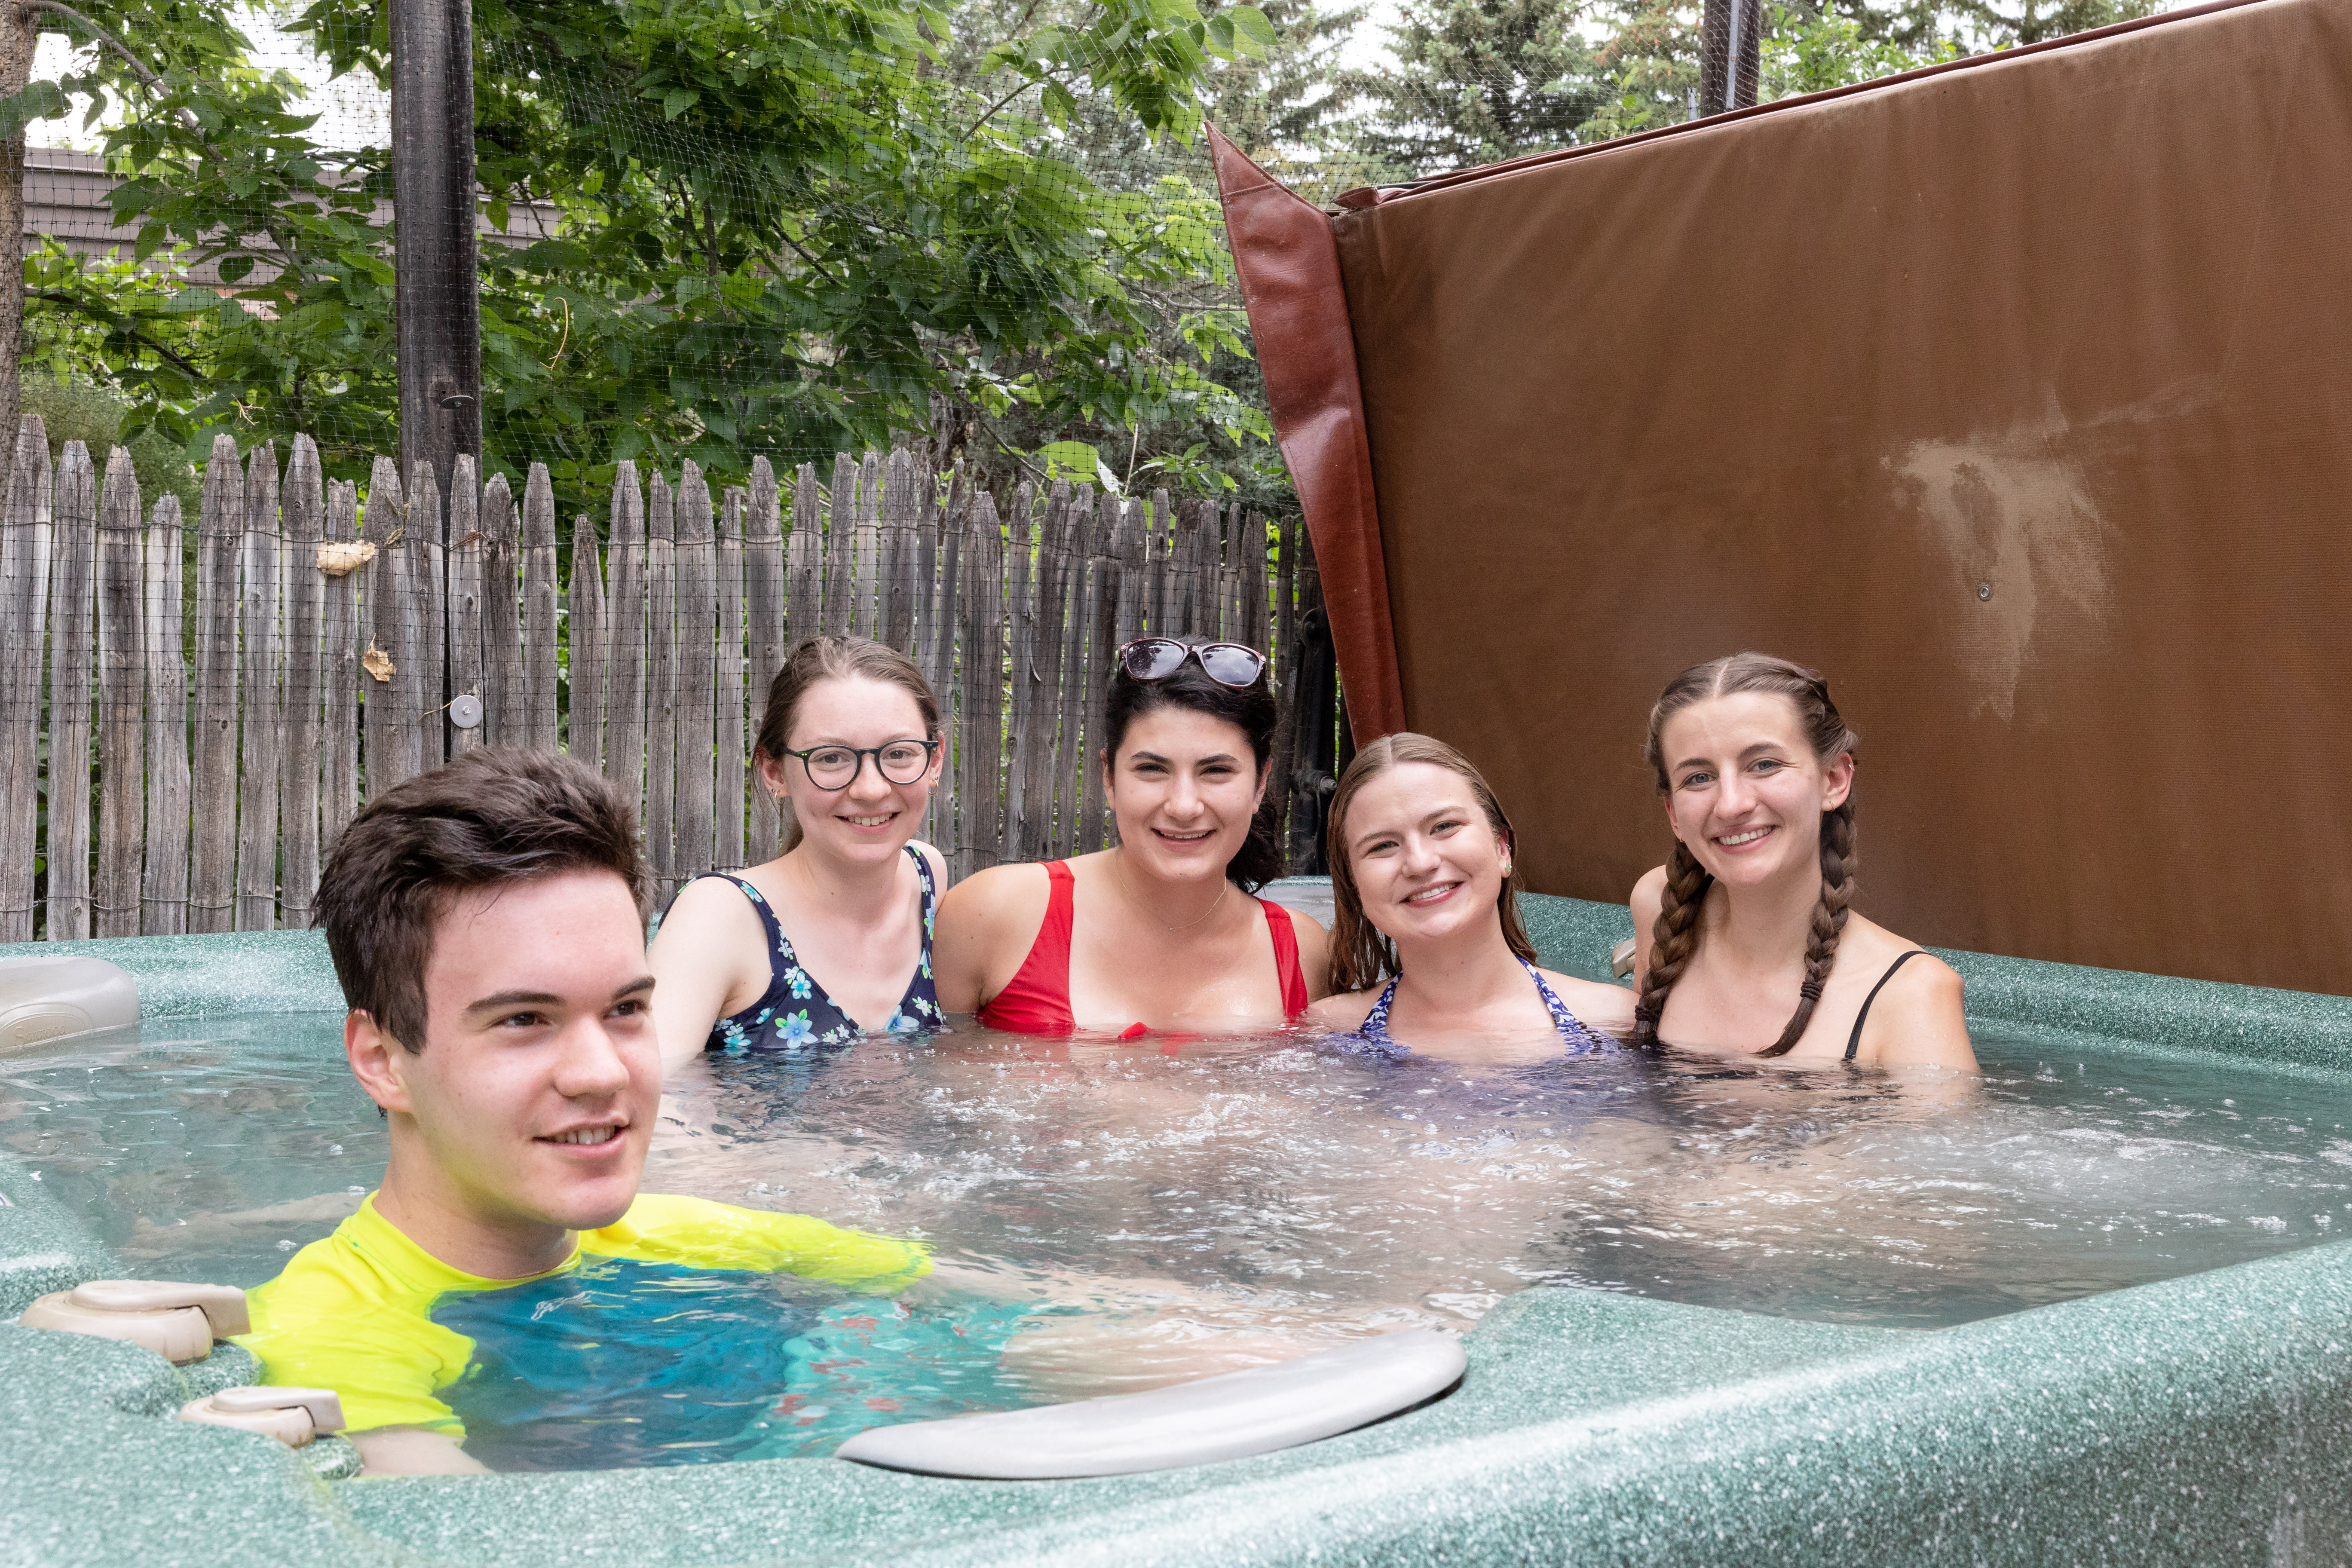 '22 Fellows [left to right] Dylan Hamme, Stephanie Fritz, Elena Varon, Susannah Greenslit, & Sophie Steger at the Pool Party <span class="cc-gallery-credit">[Chidera Ikpeamarom]</span>